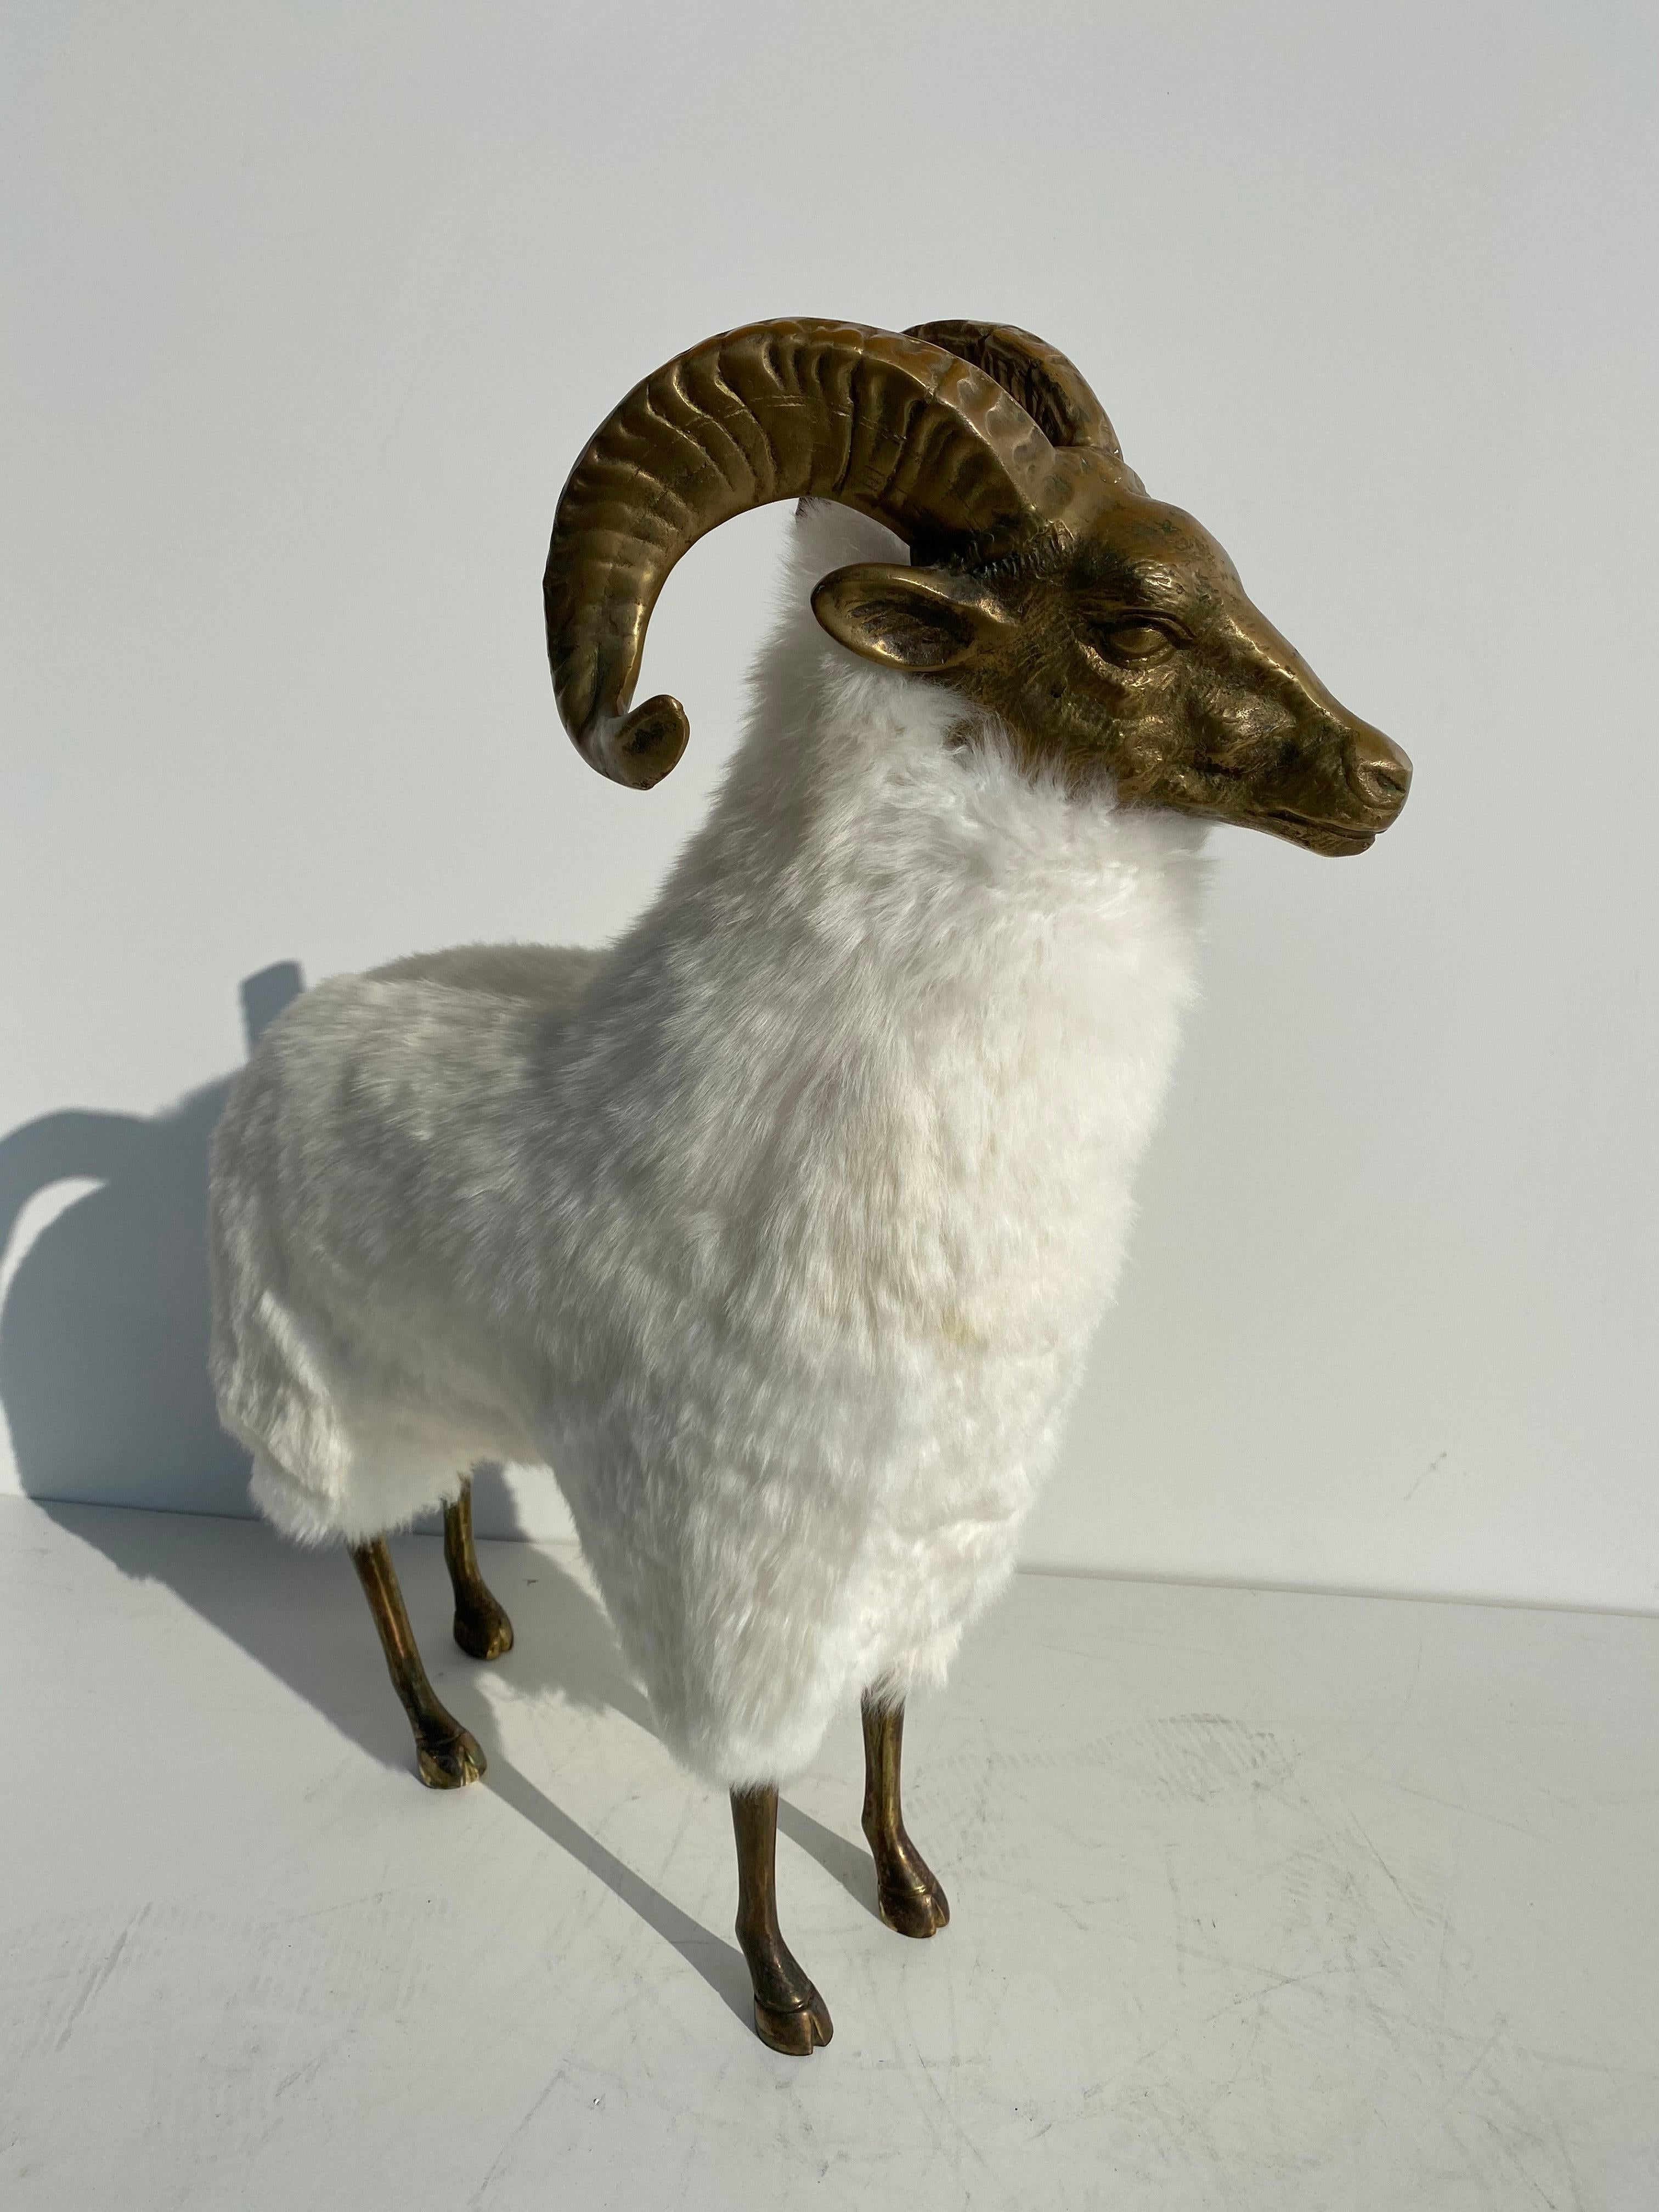 Brass sheep or ram sculpture in the style of Lalanne.